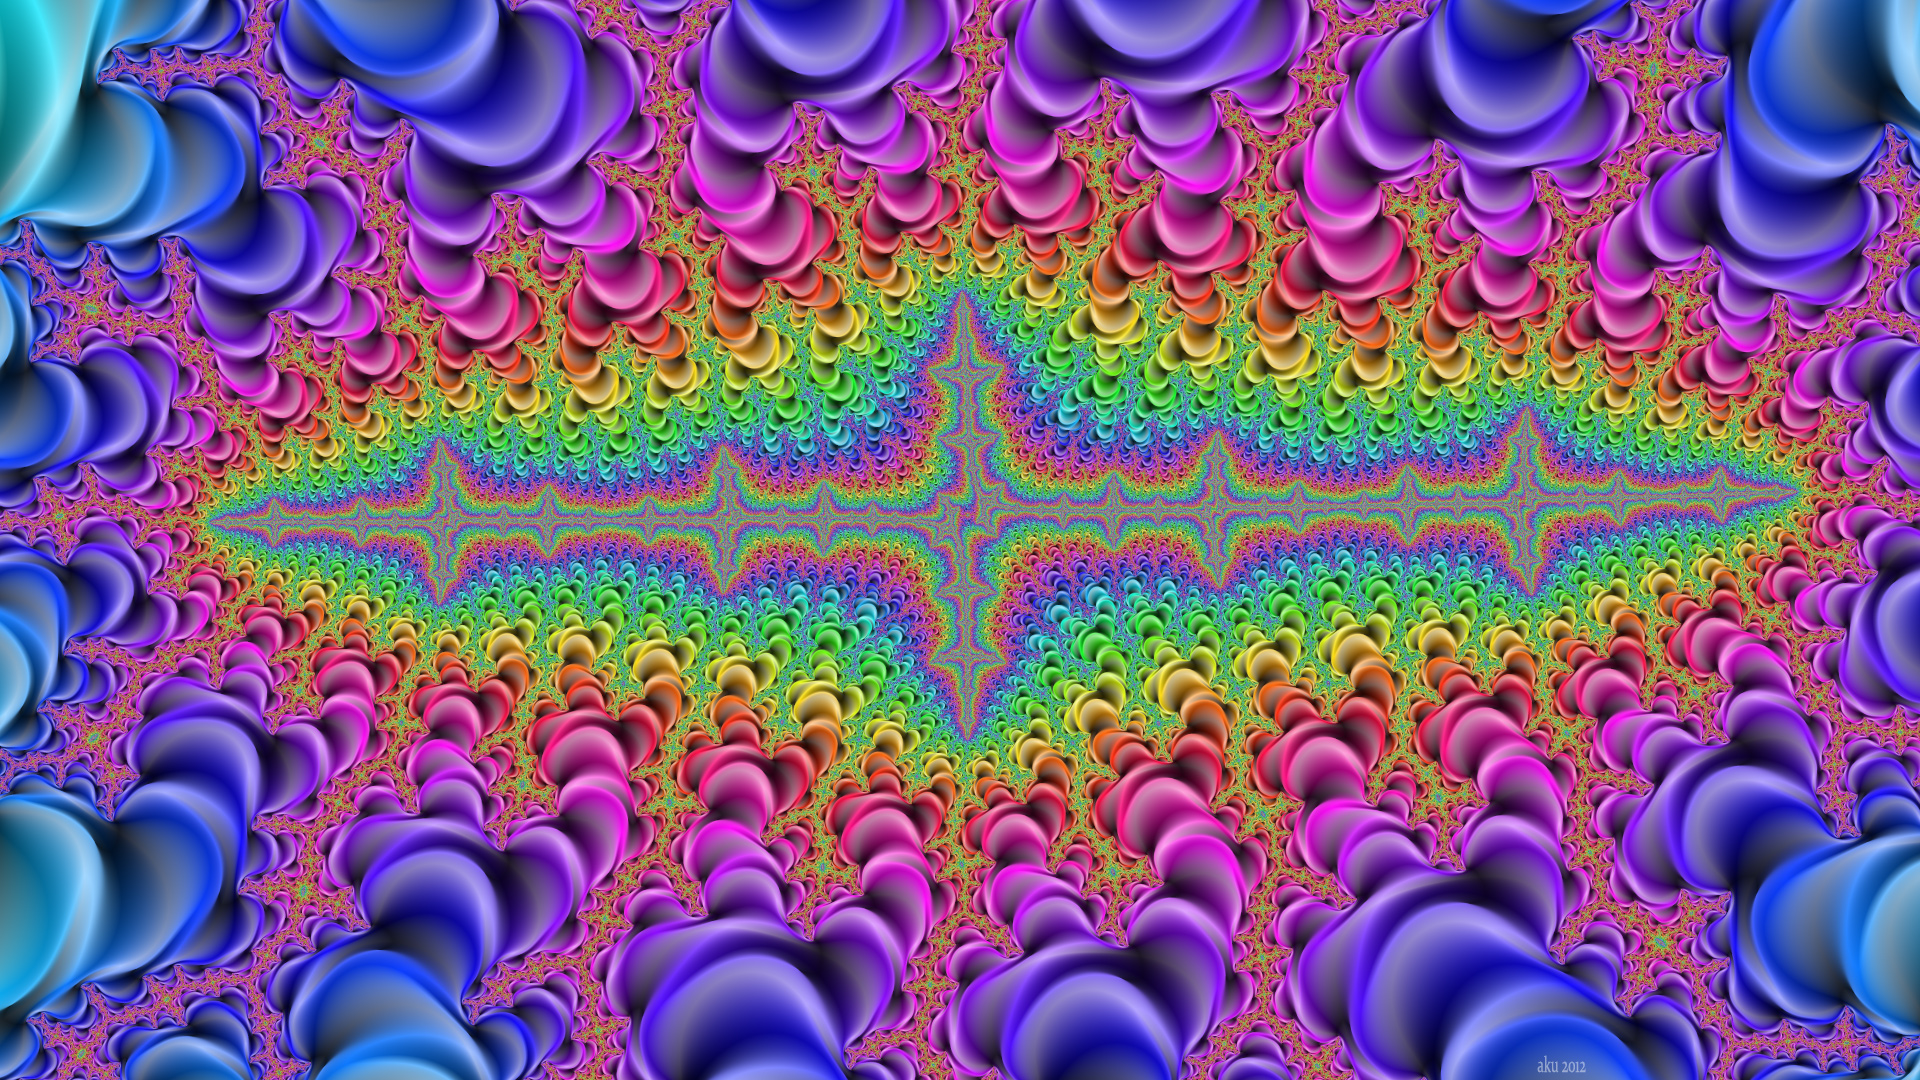 psychedelic, artistic cellphone